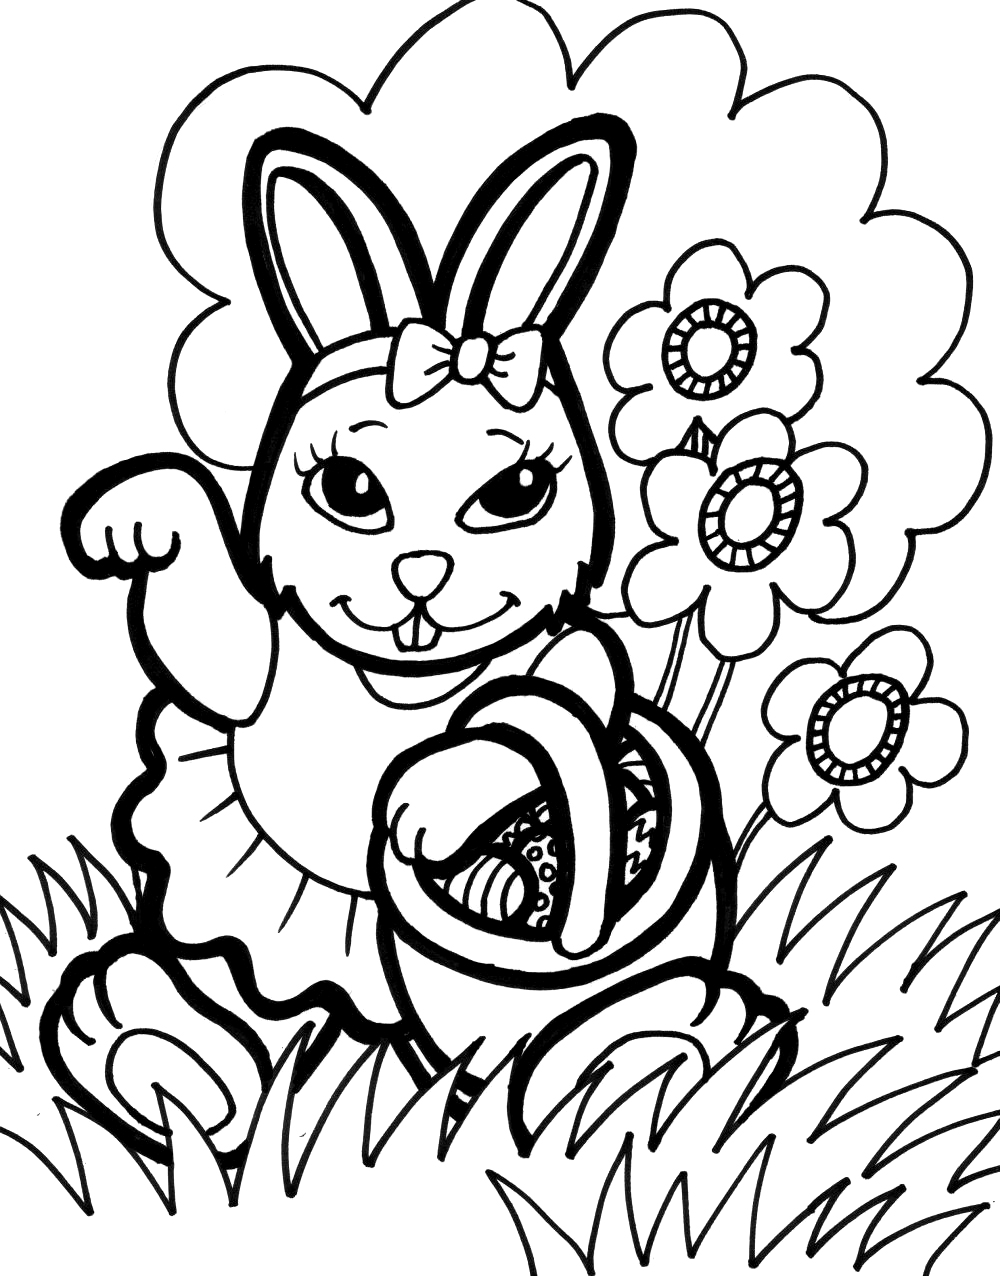  Bunny Coloring Pages 9